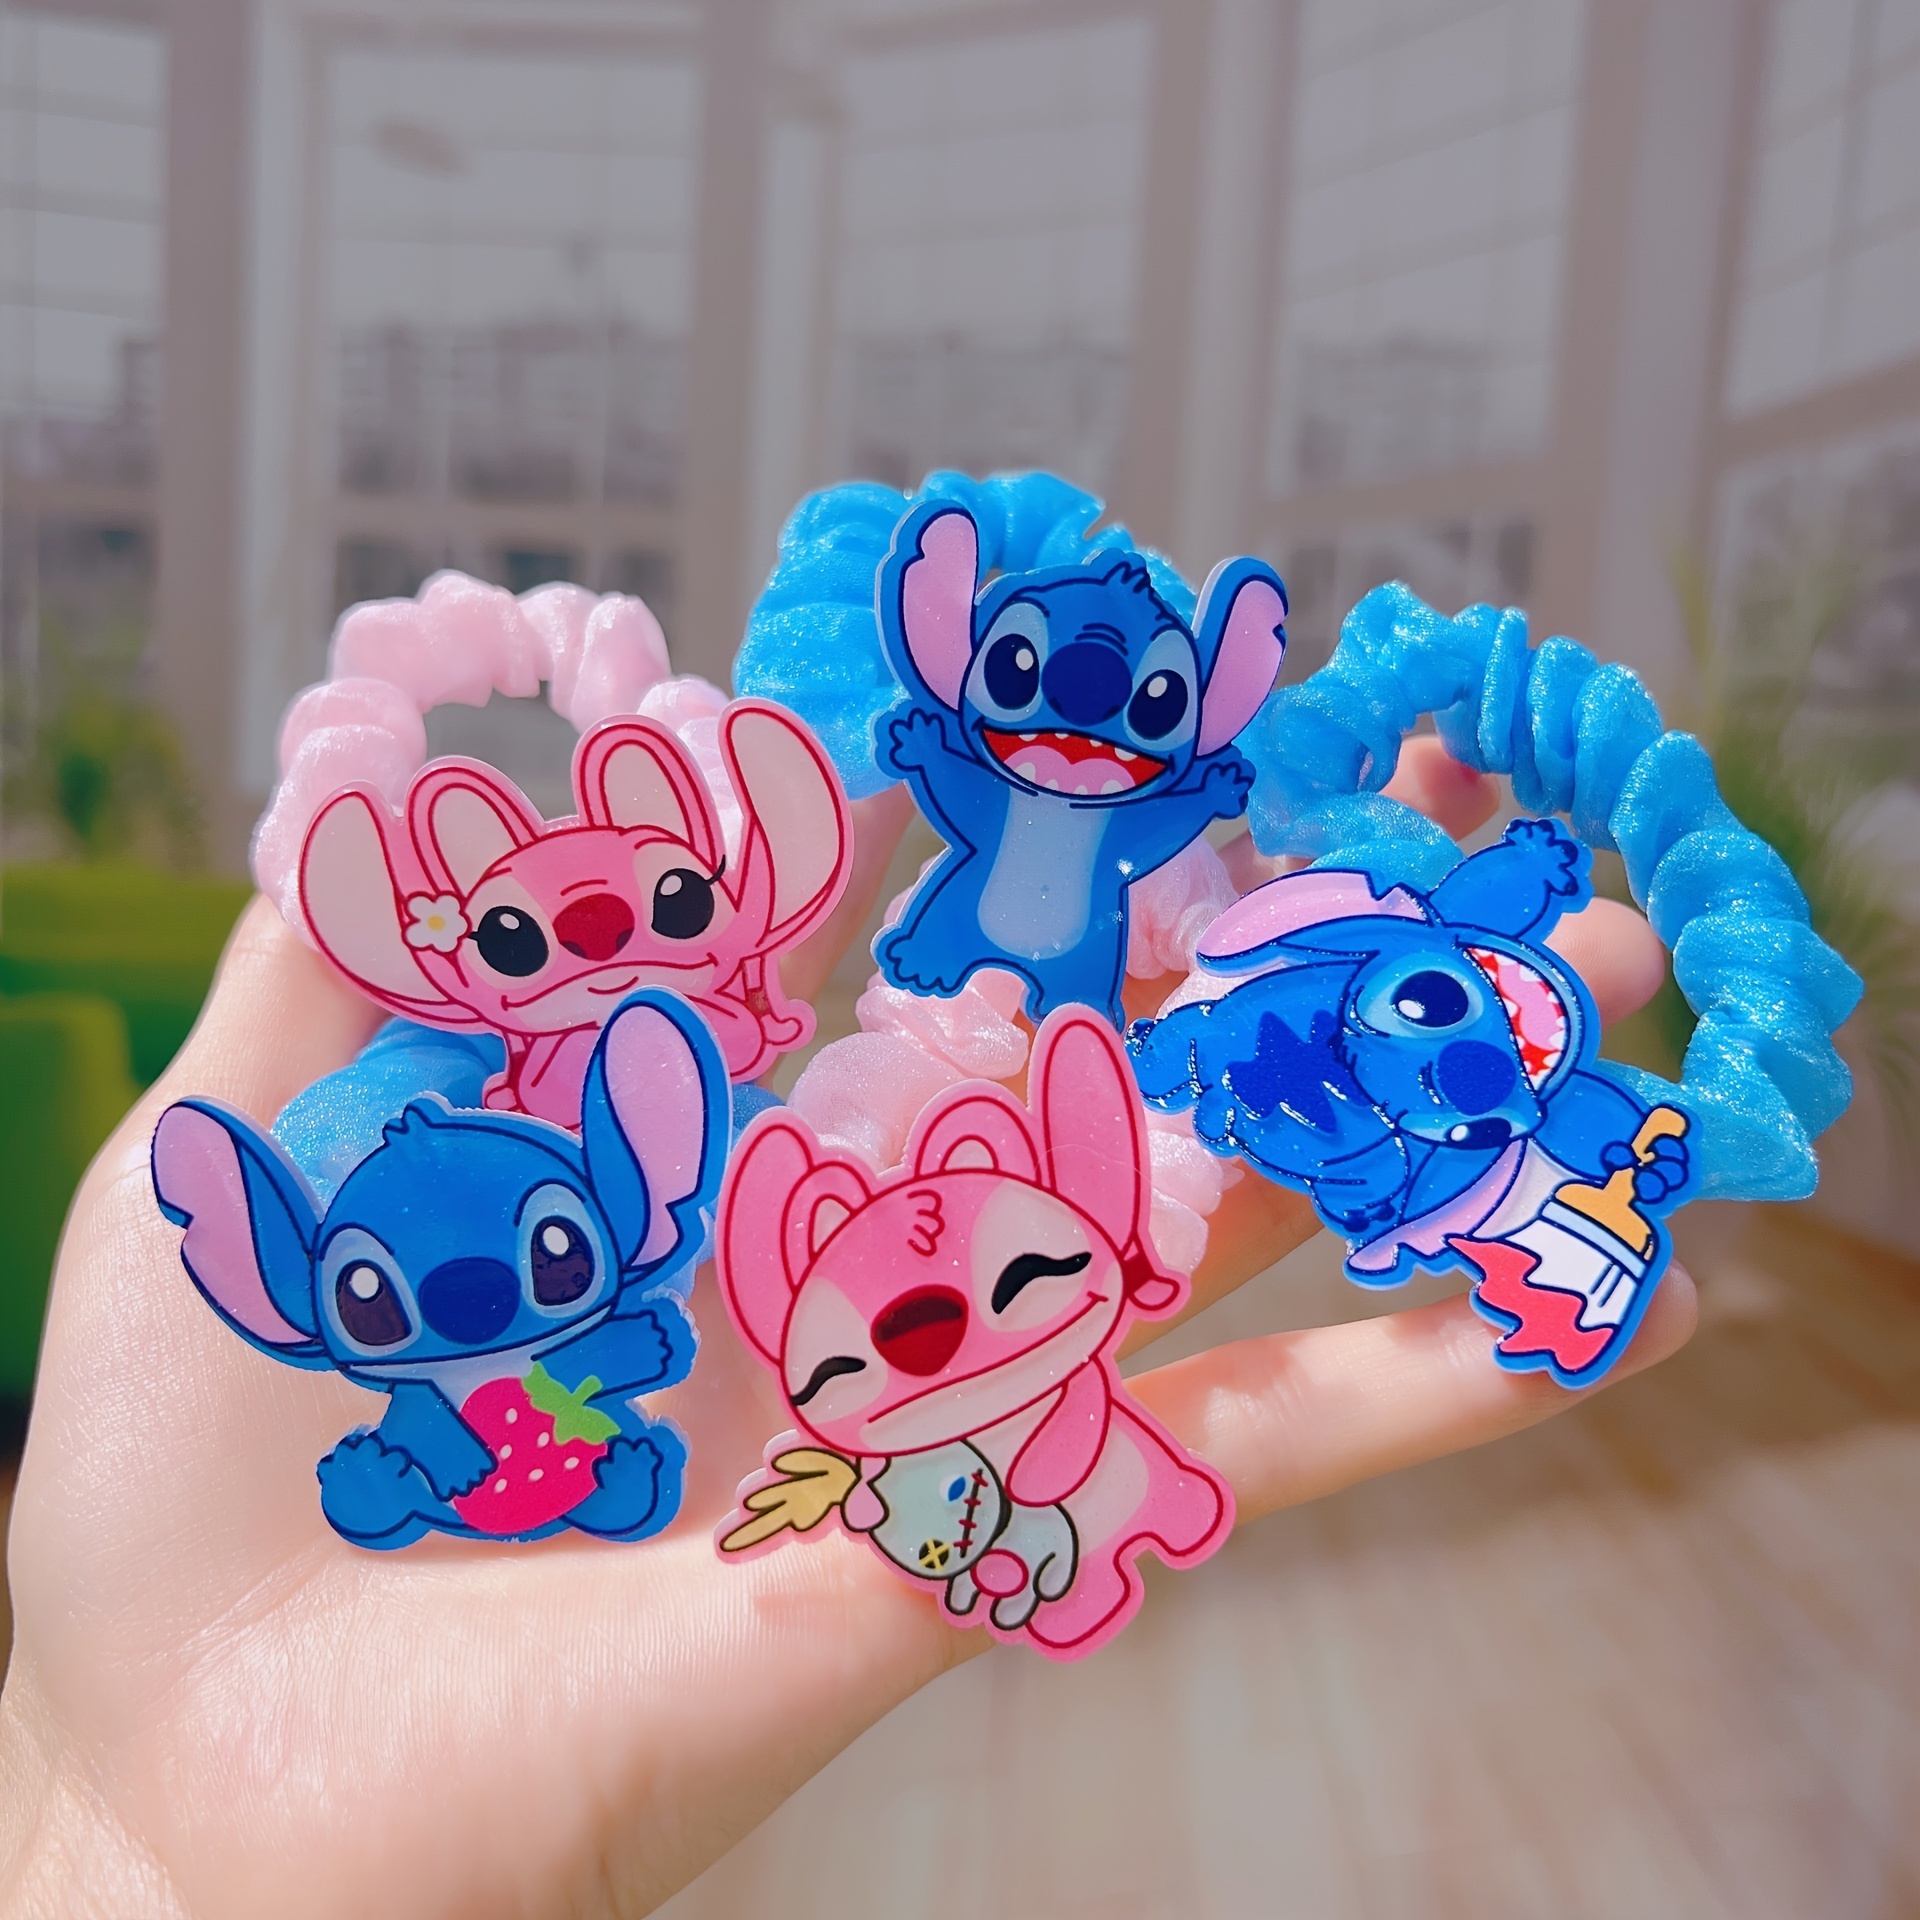 

Lovely Disney Cartoon Decorative Hair Loops Elastic Pleated Hair Ties Non Slip Ponytail Holders For Women And Daily Use Wear